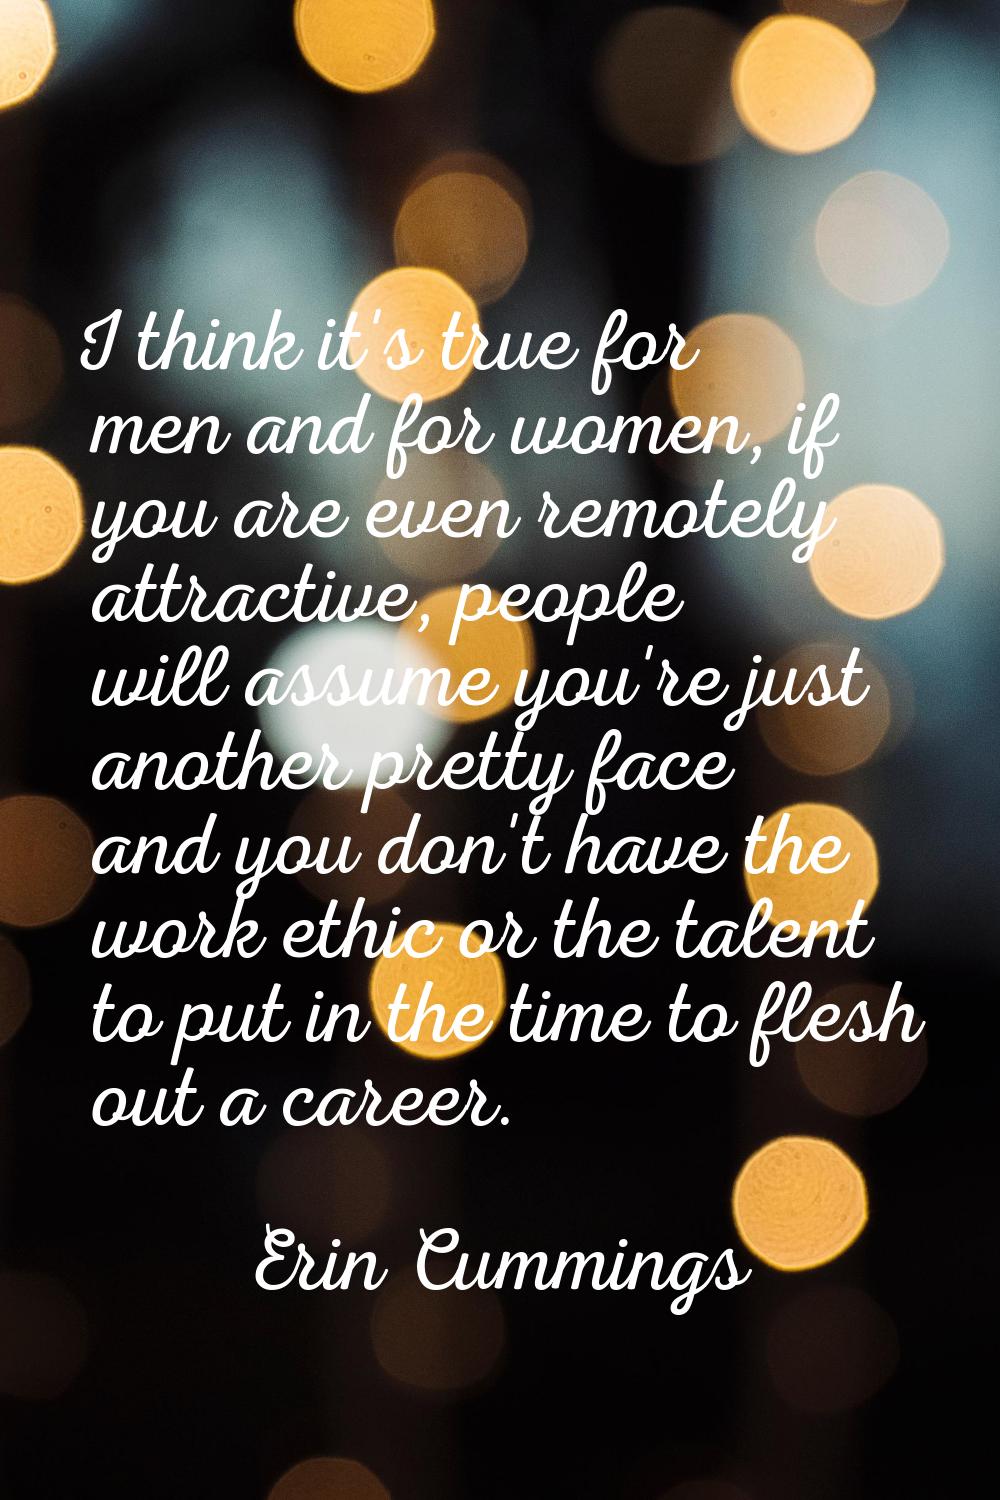 I think it's true for men and for women, if you are even remotely attractive, people will assume yo